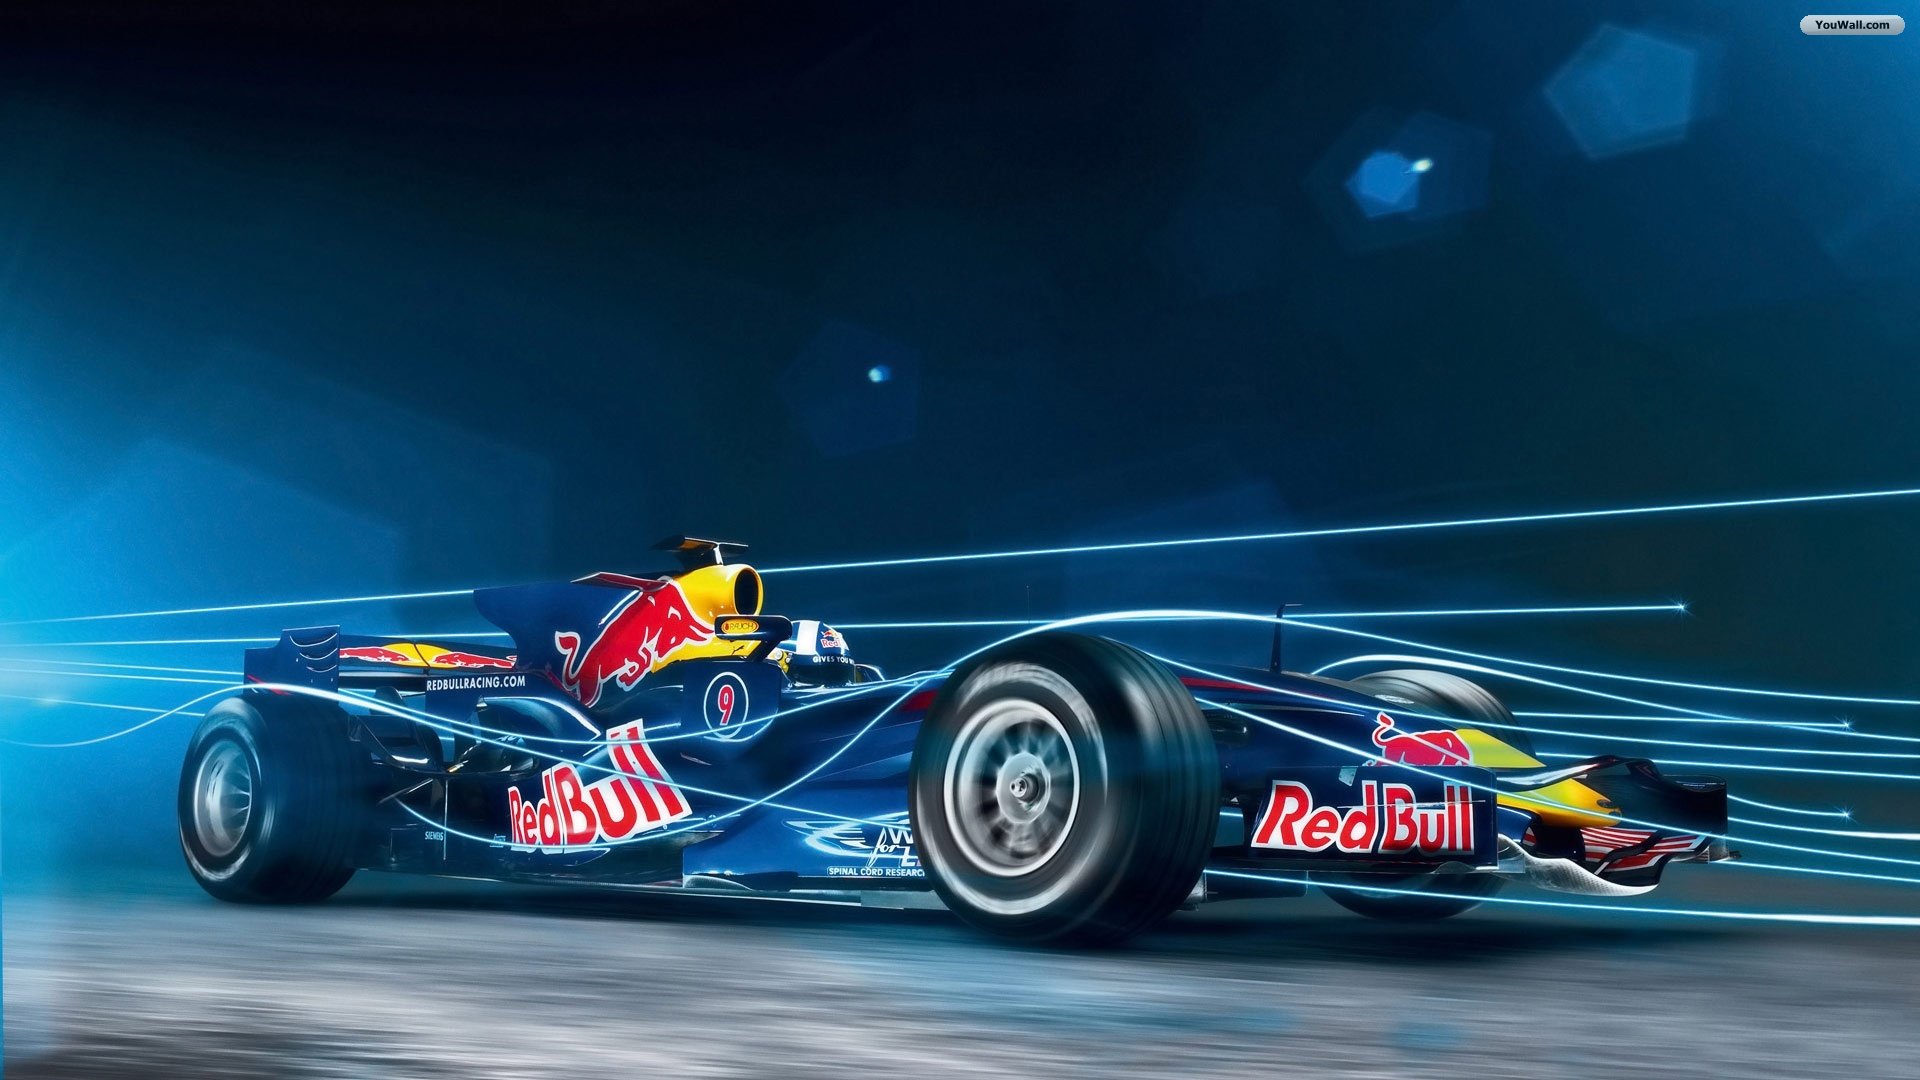 Comment to Over 50 Formula One Cars F1 Wallpapers in HD For 1920x1080